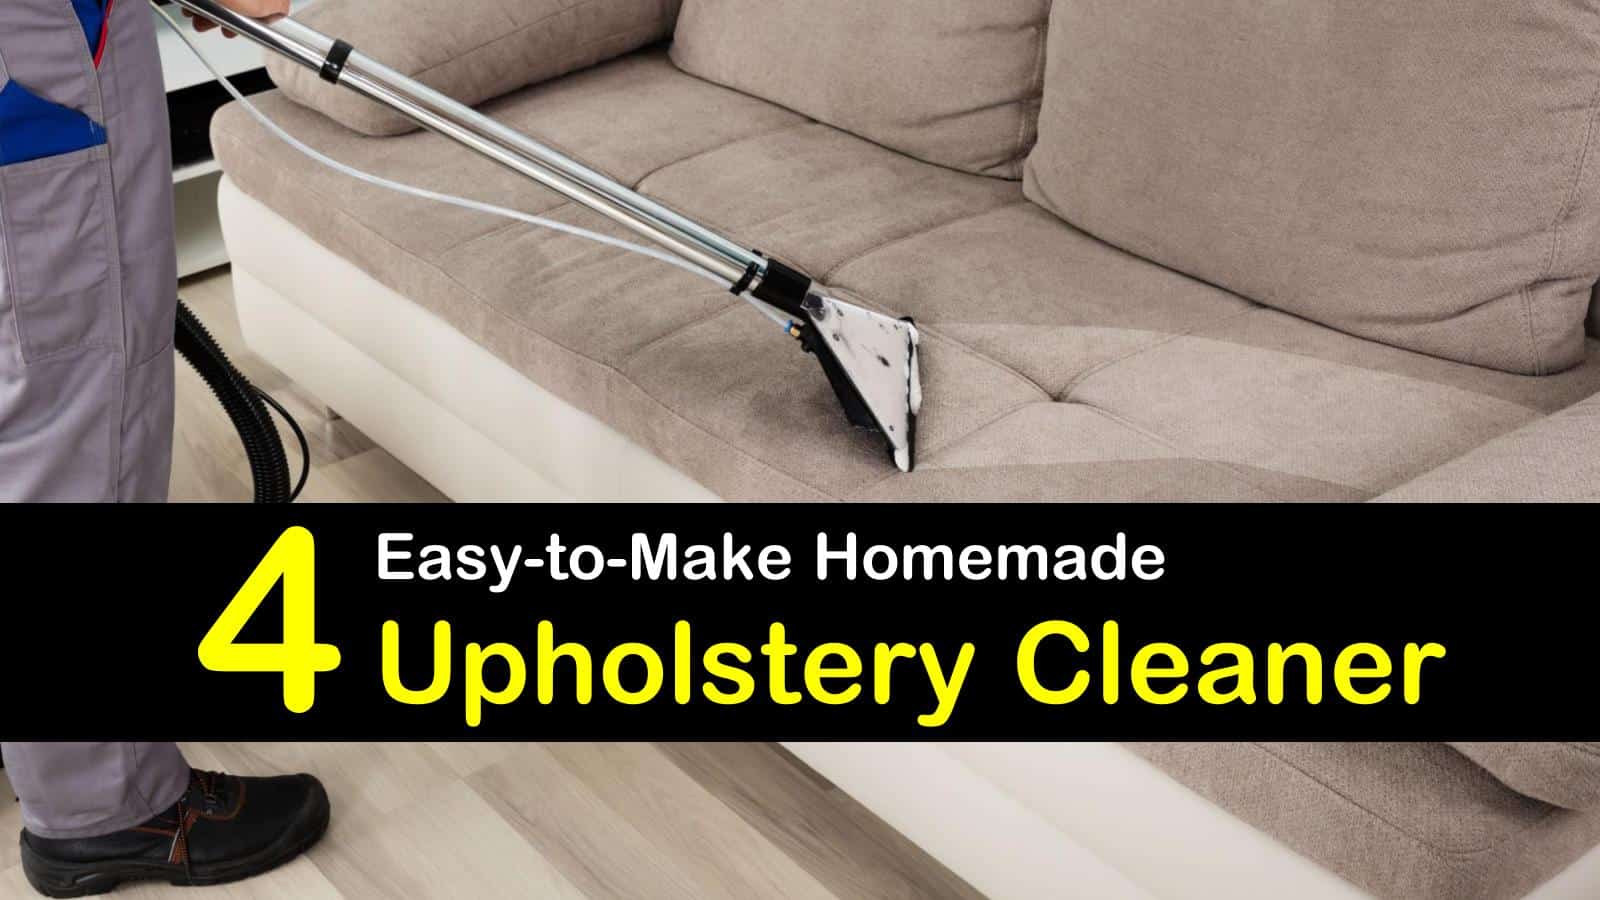 4 Homemade Upholstery Cleaner How To, How To Deodorize Upholstered Furniture